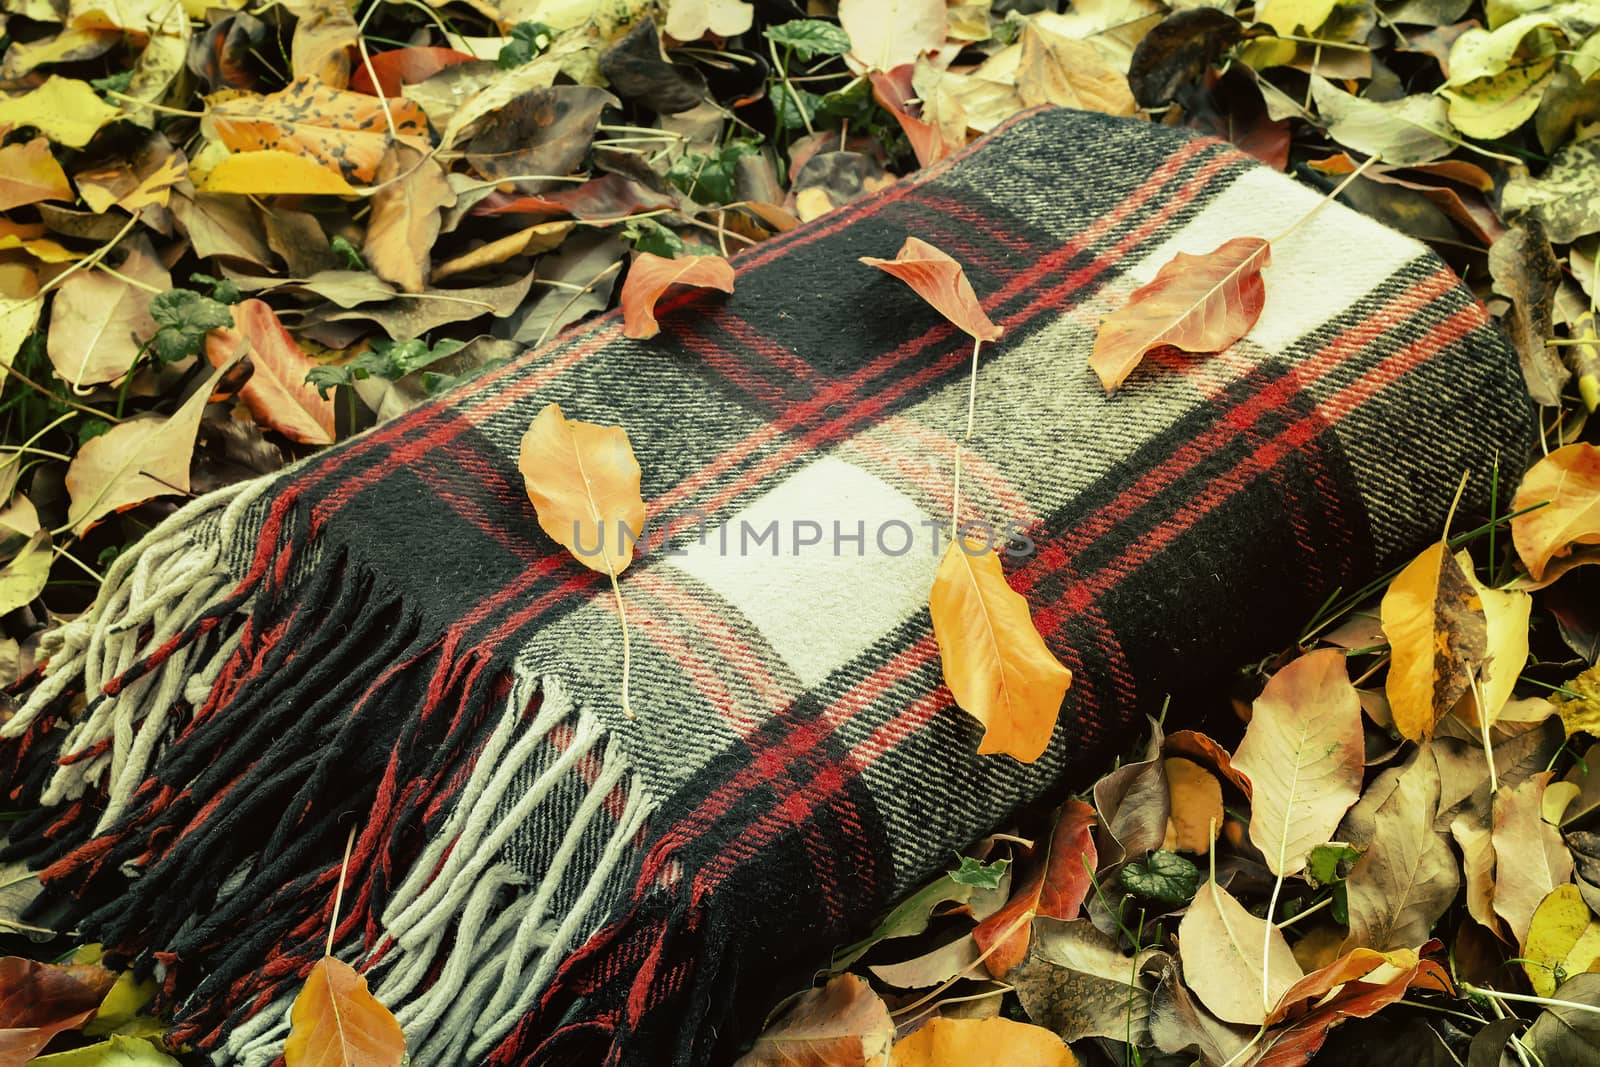 On the ground among the grass and fallen leaves is a warm plaid blanket, prepared to stay during the picnic.